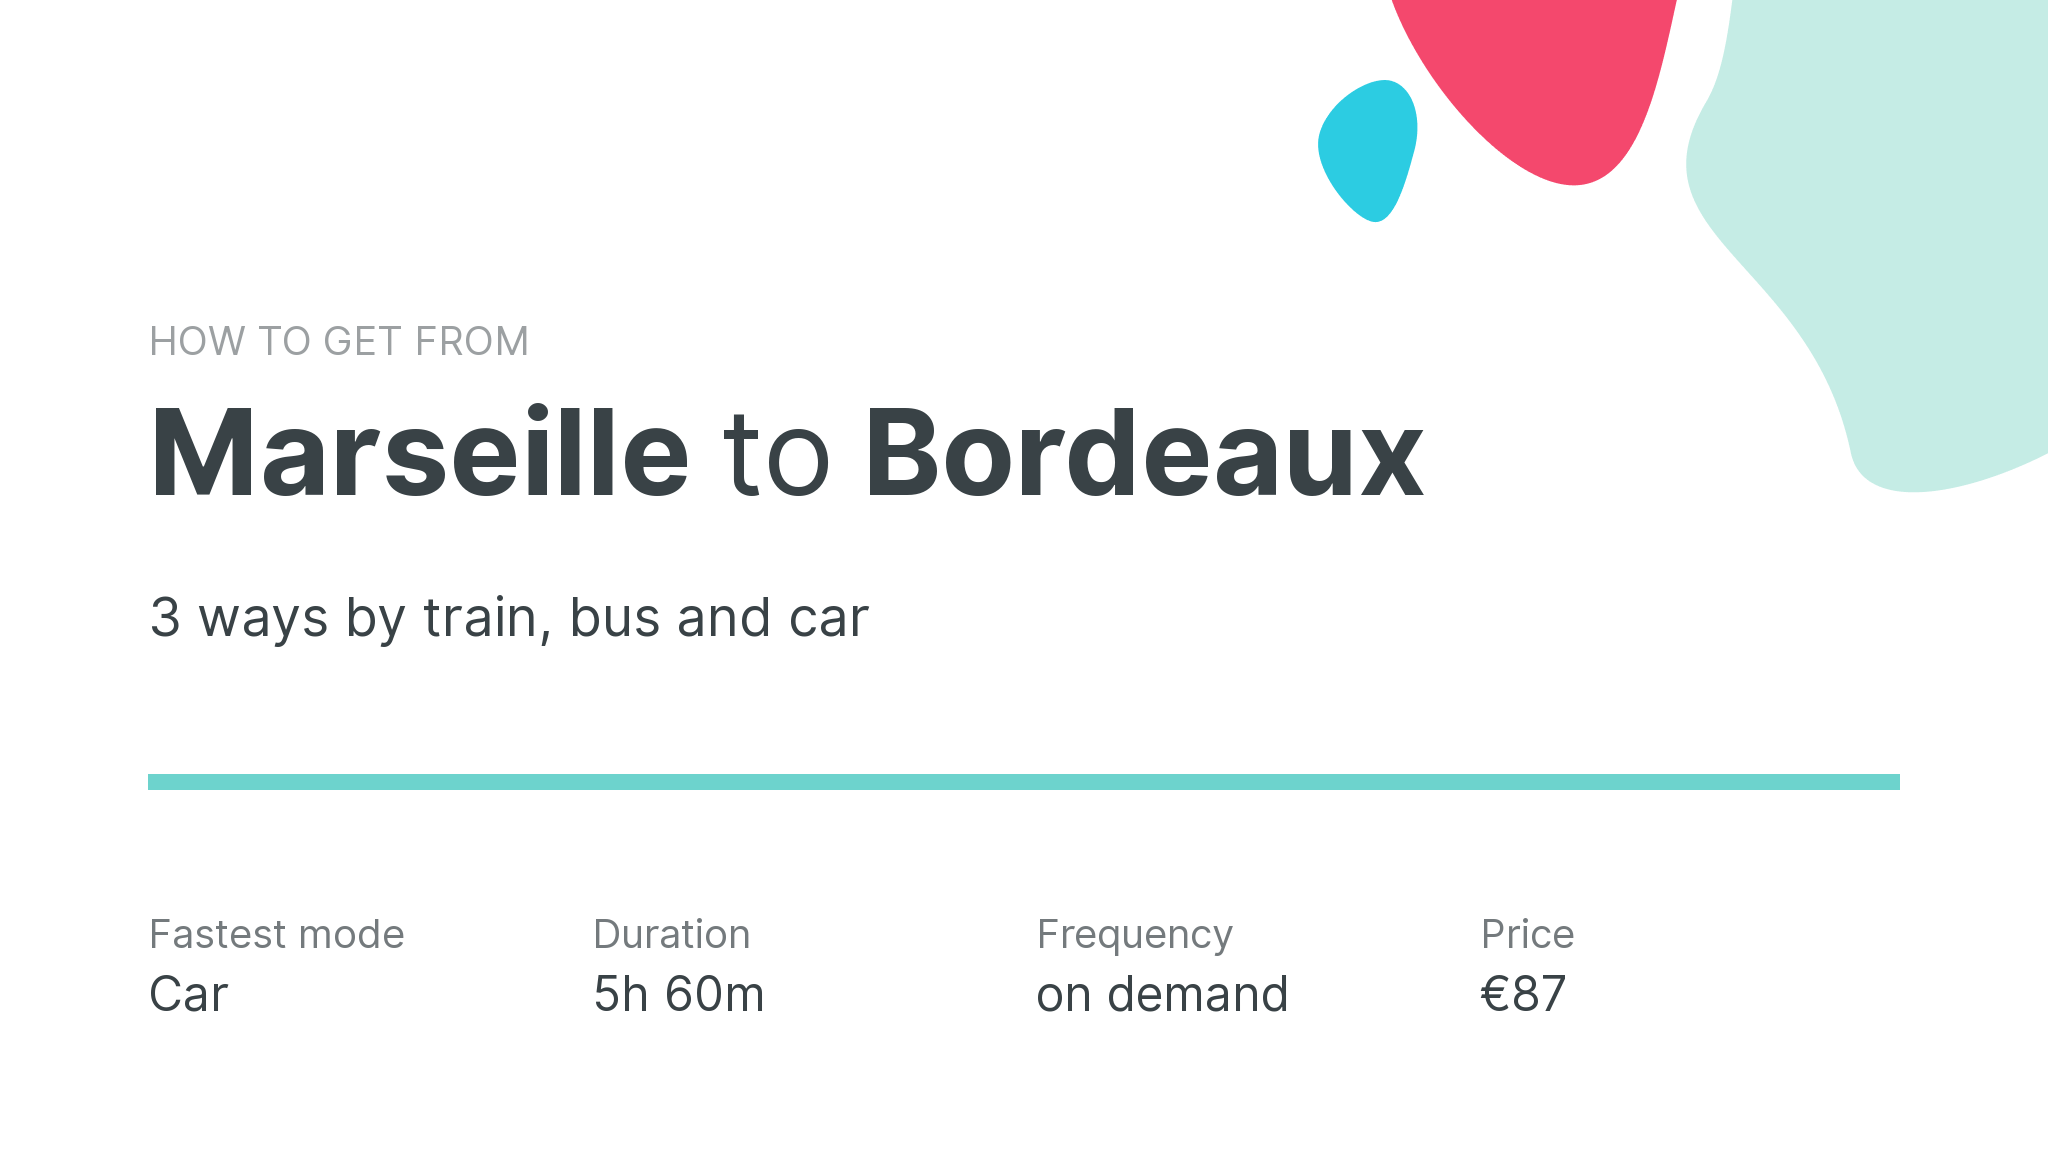 How do I get from Marseille to Bordeaux